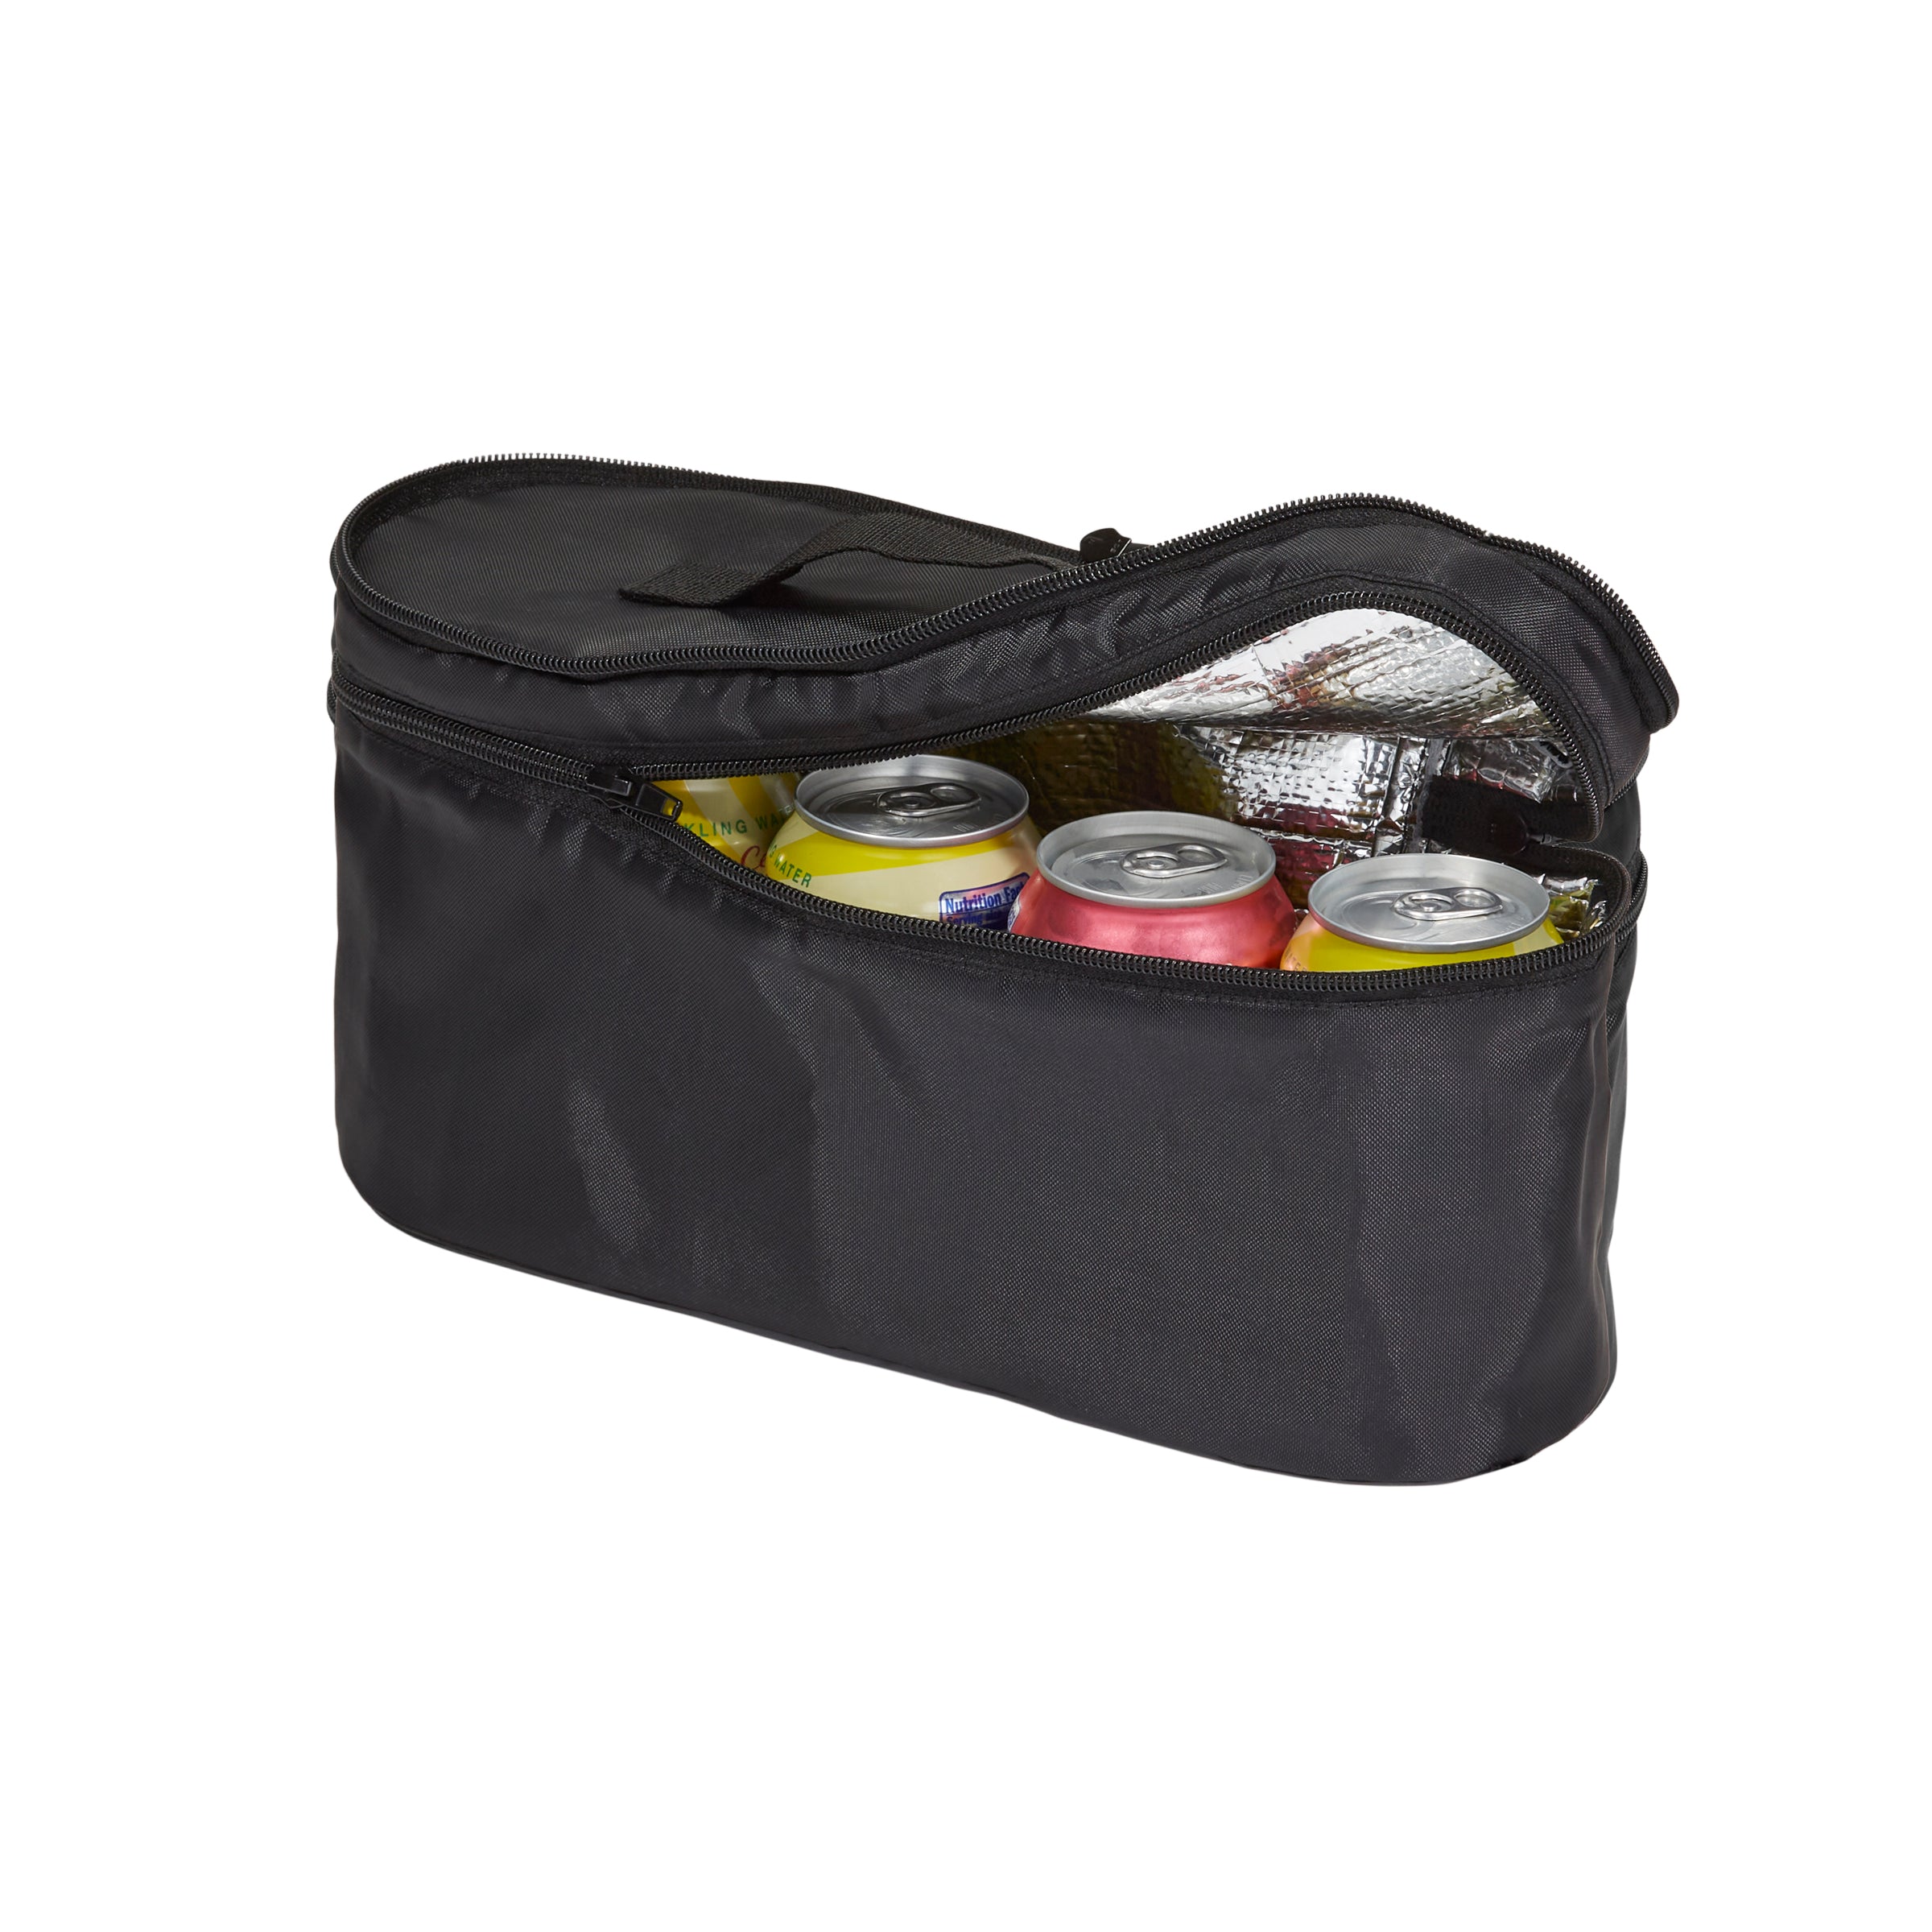 removable cooler pouch keeps drinks, formula, food, medicine for baby and more cool on the go